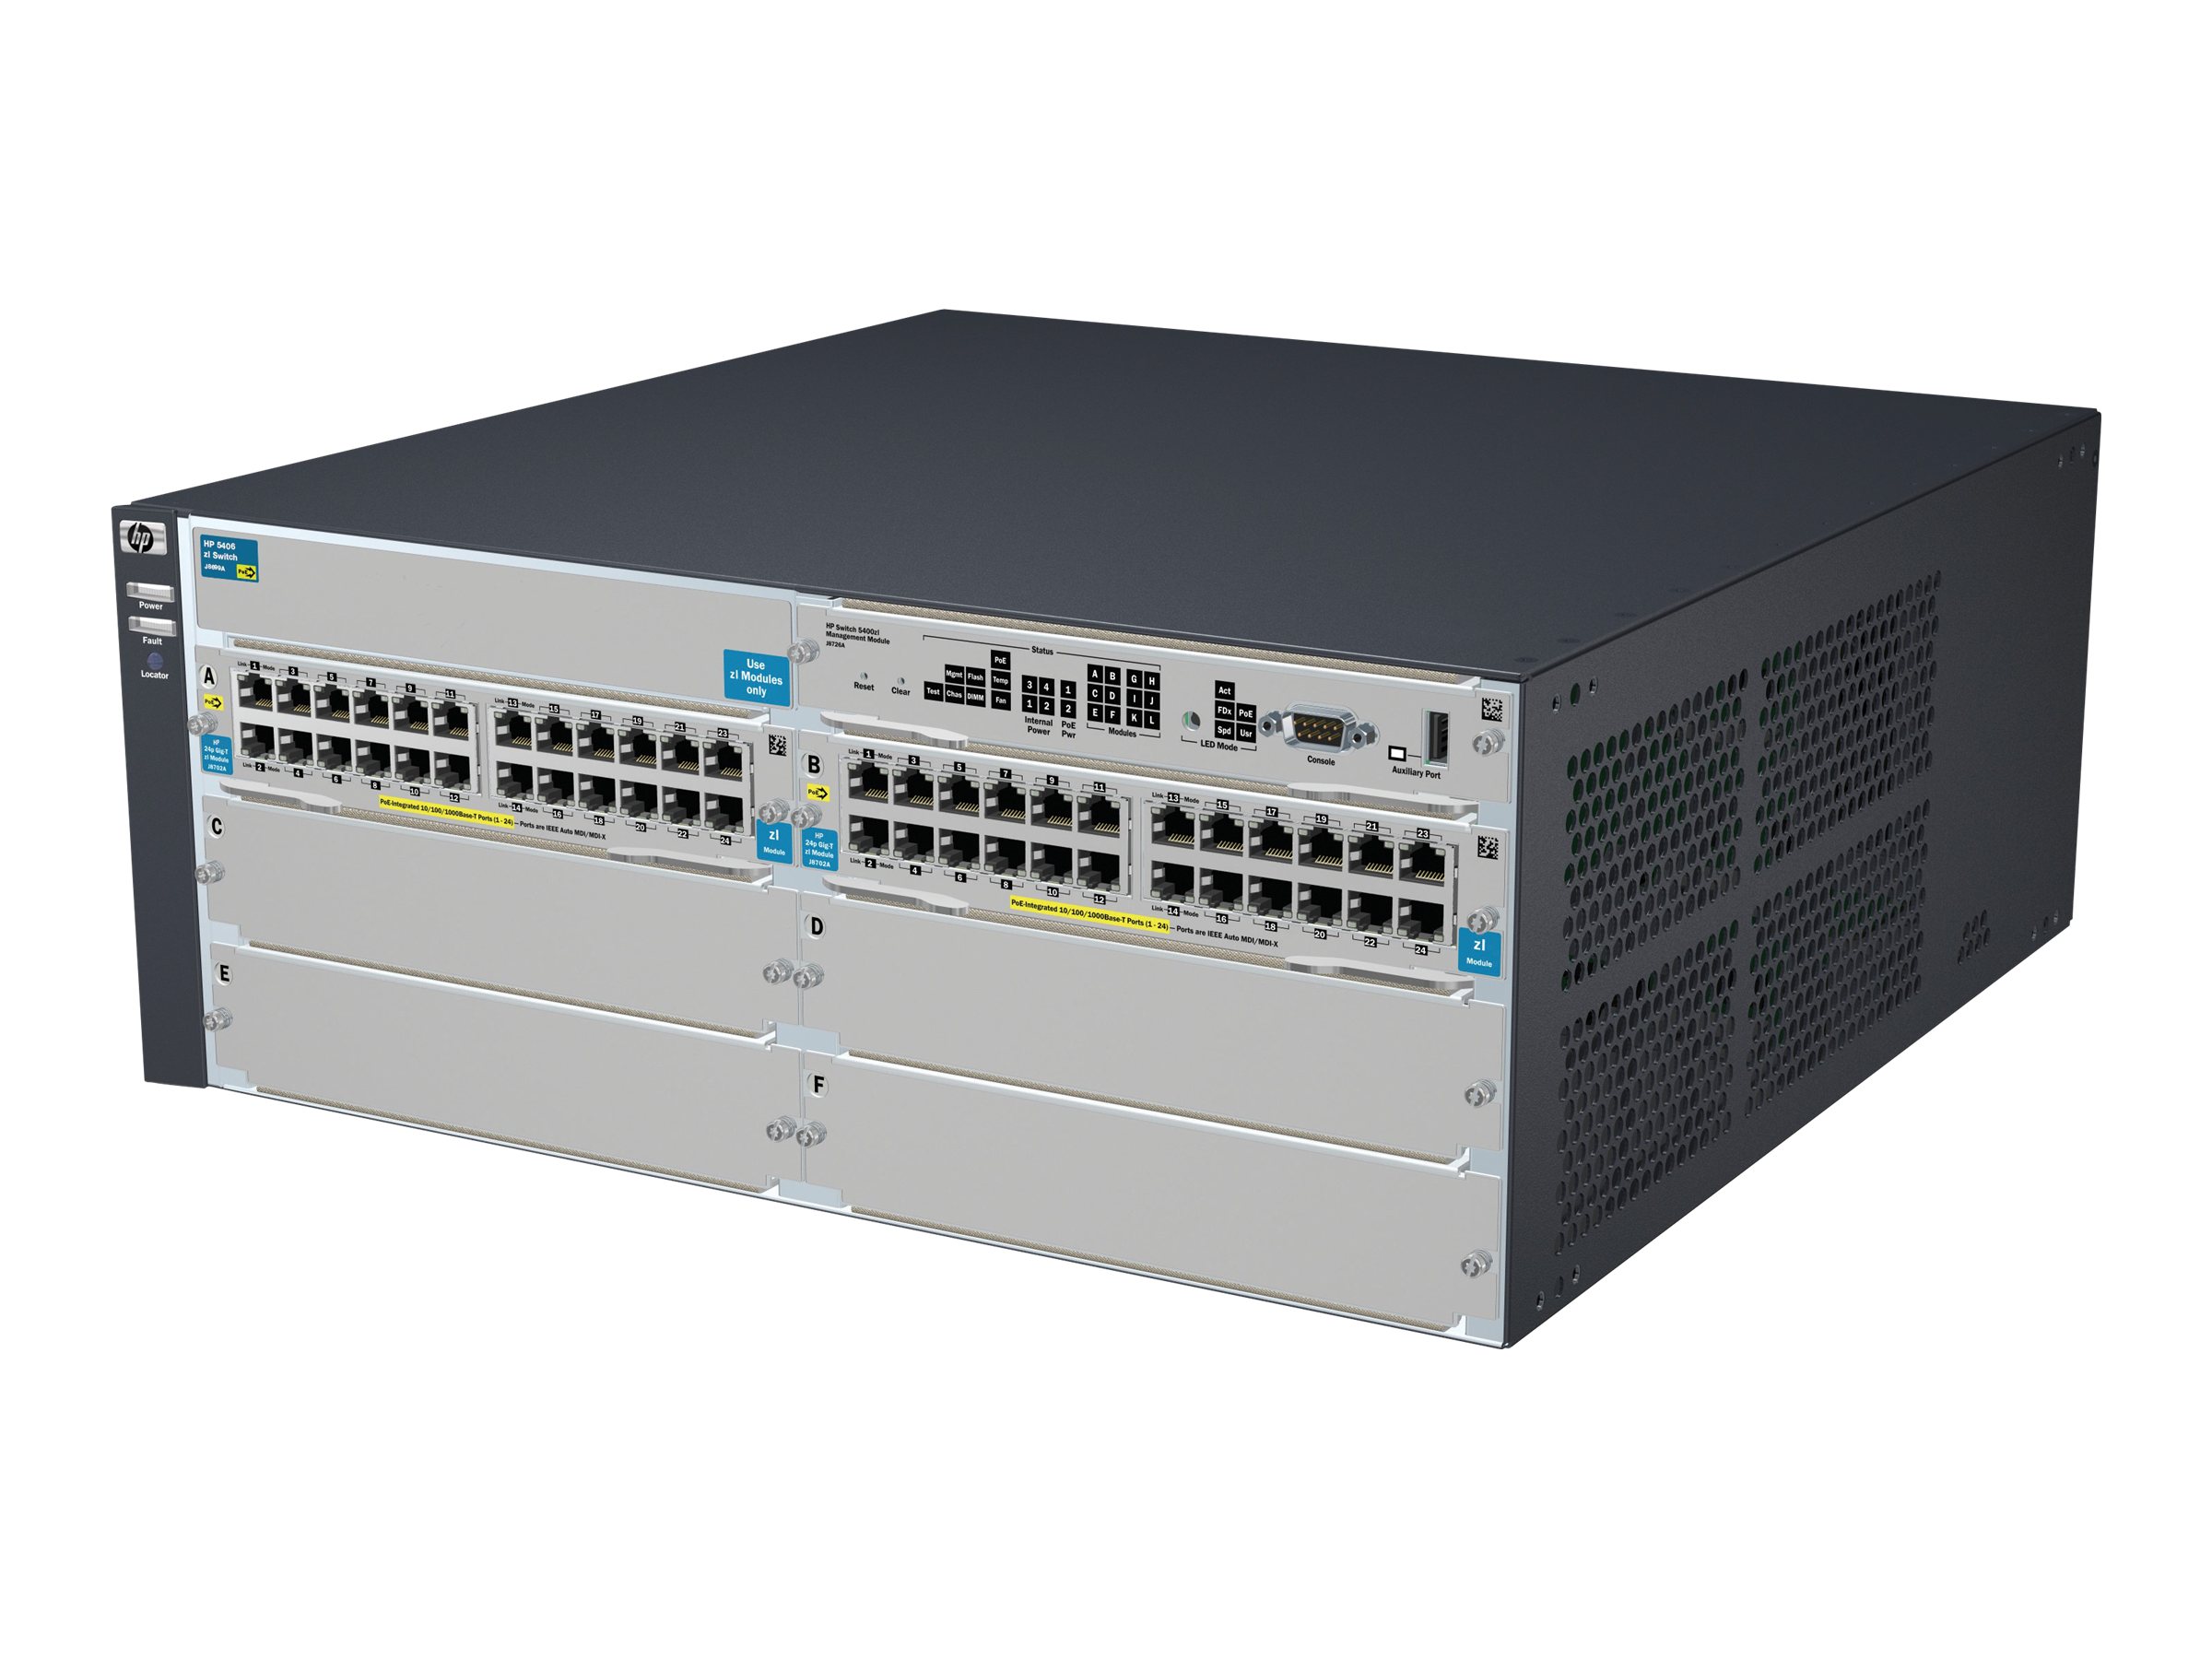 HP 5412 zl Switch Chassis (J8698A) - REFURB